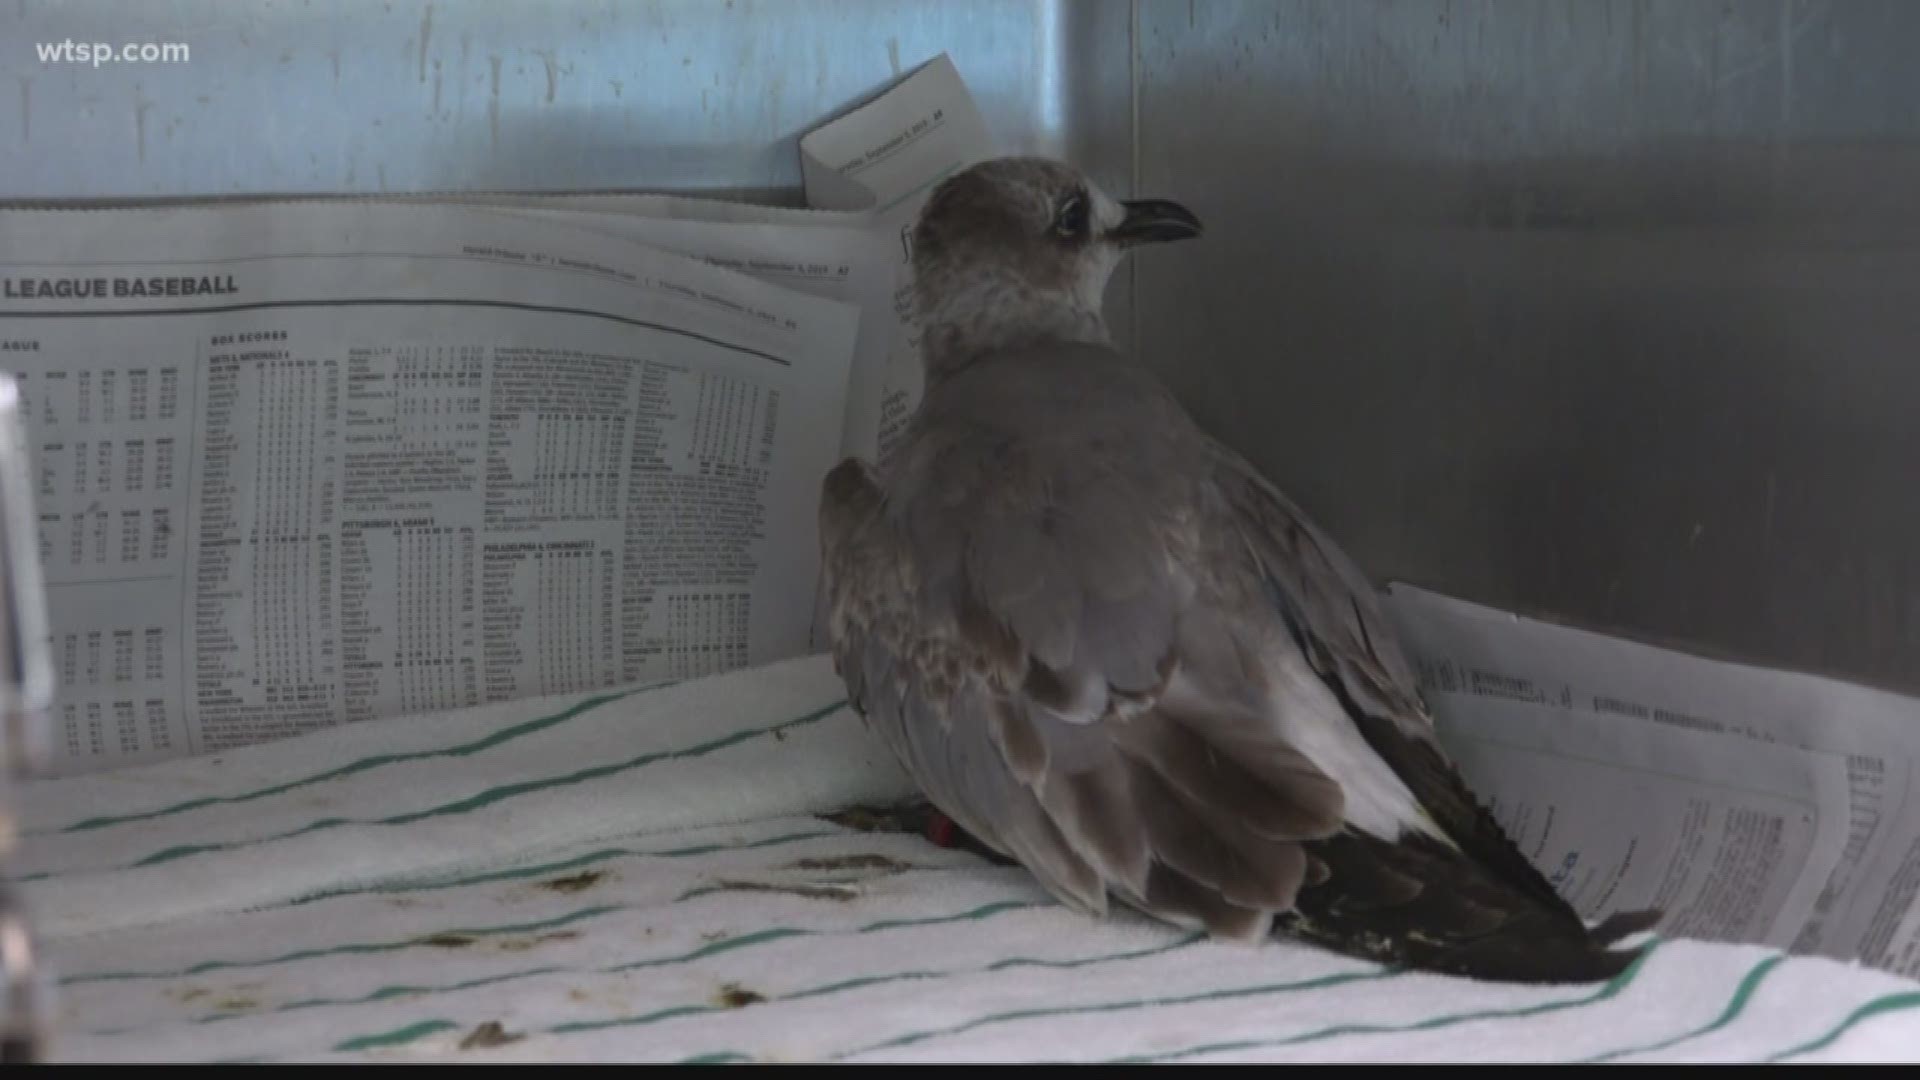 Hospital technicians at a bird rescue in Sarasota County say they’re dealing with an unusually high number of sick and, in some cases, dying birds.